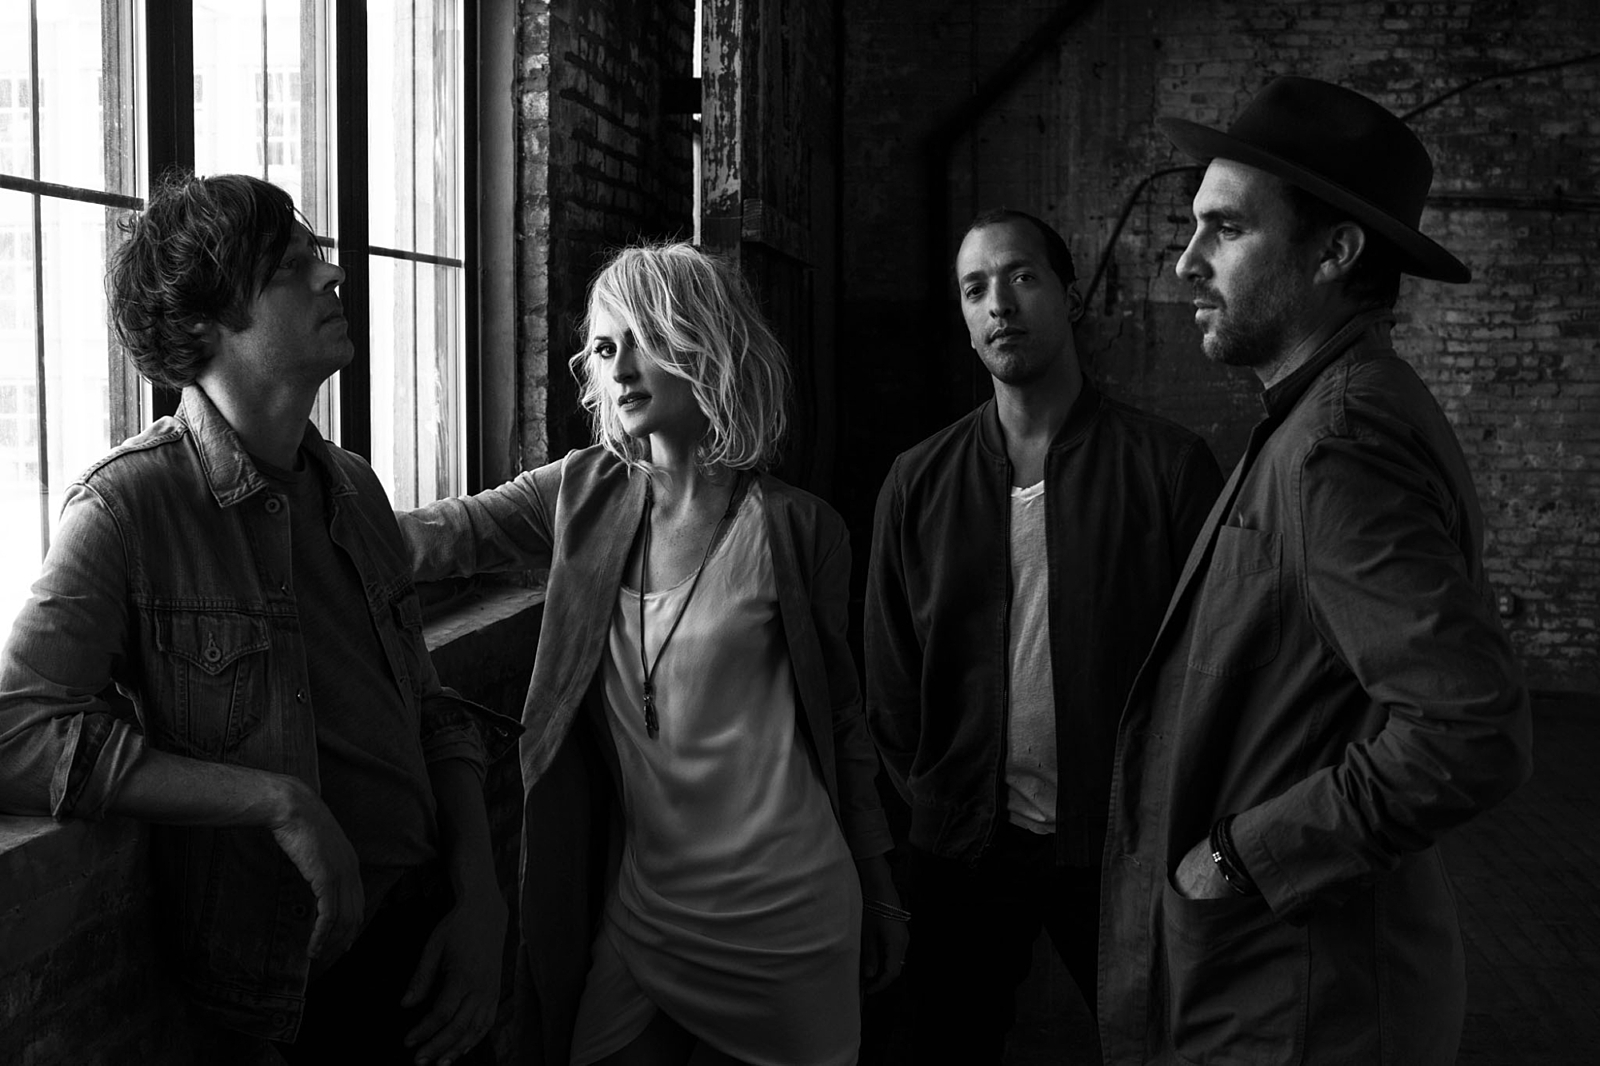 Metric: “In a mainstream world, we’re completely weird"